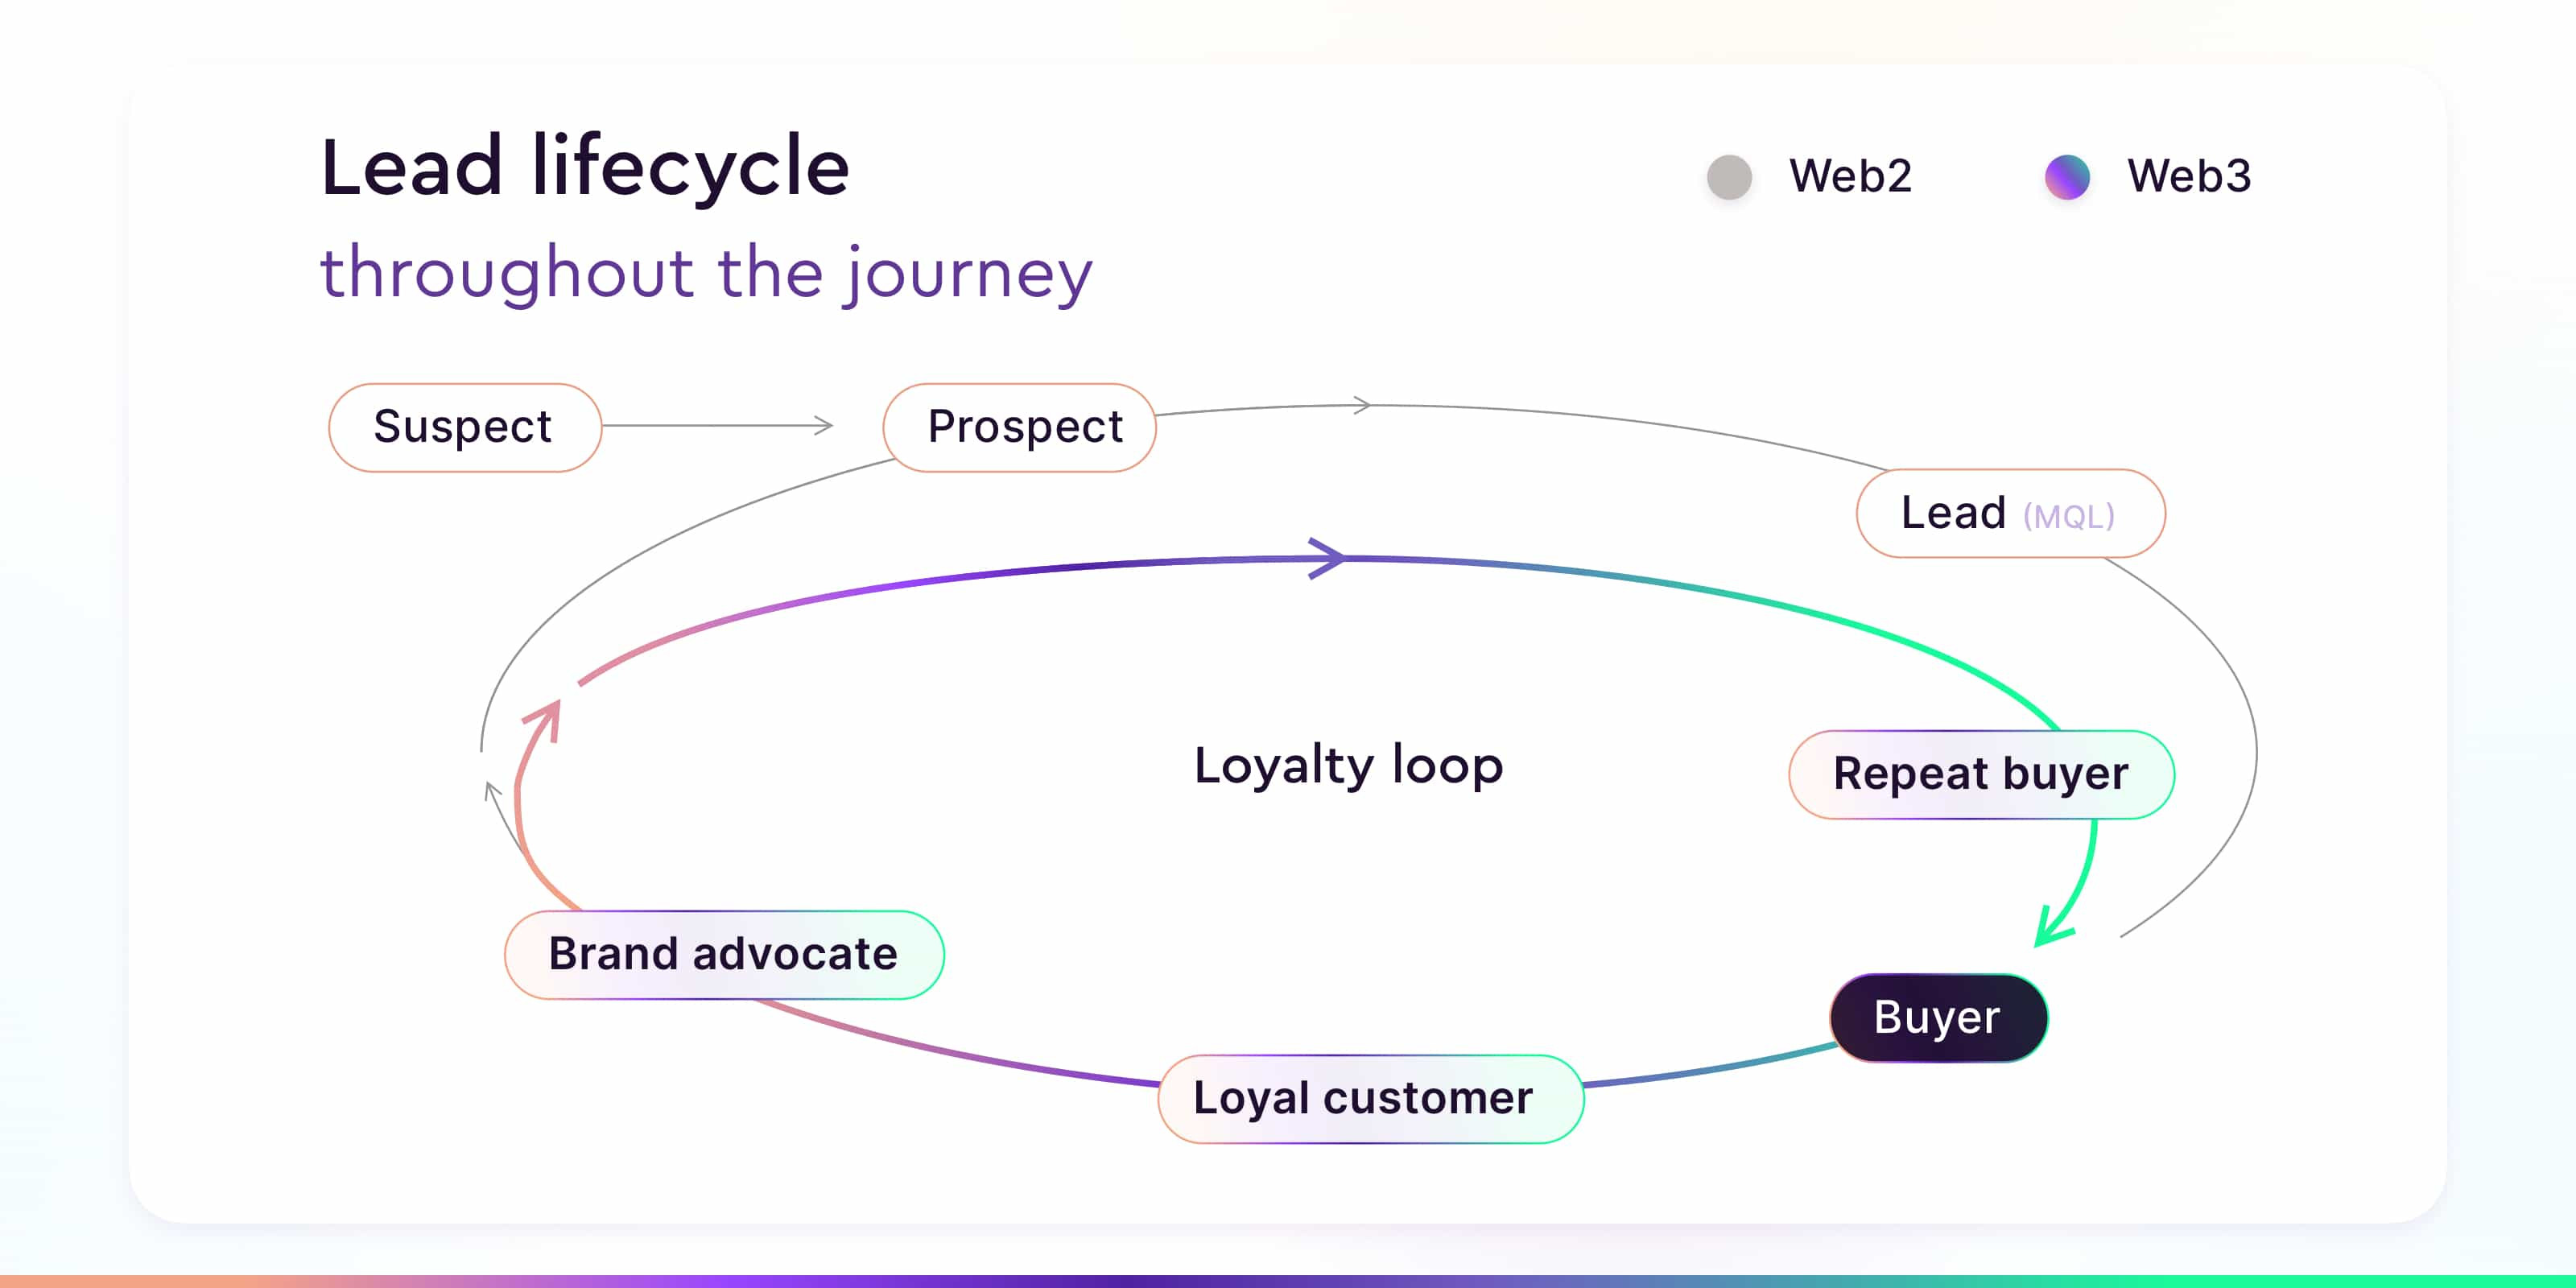 lead lifecycle throughout the journey